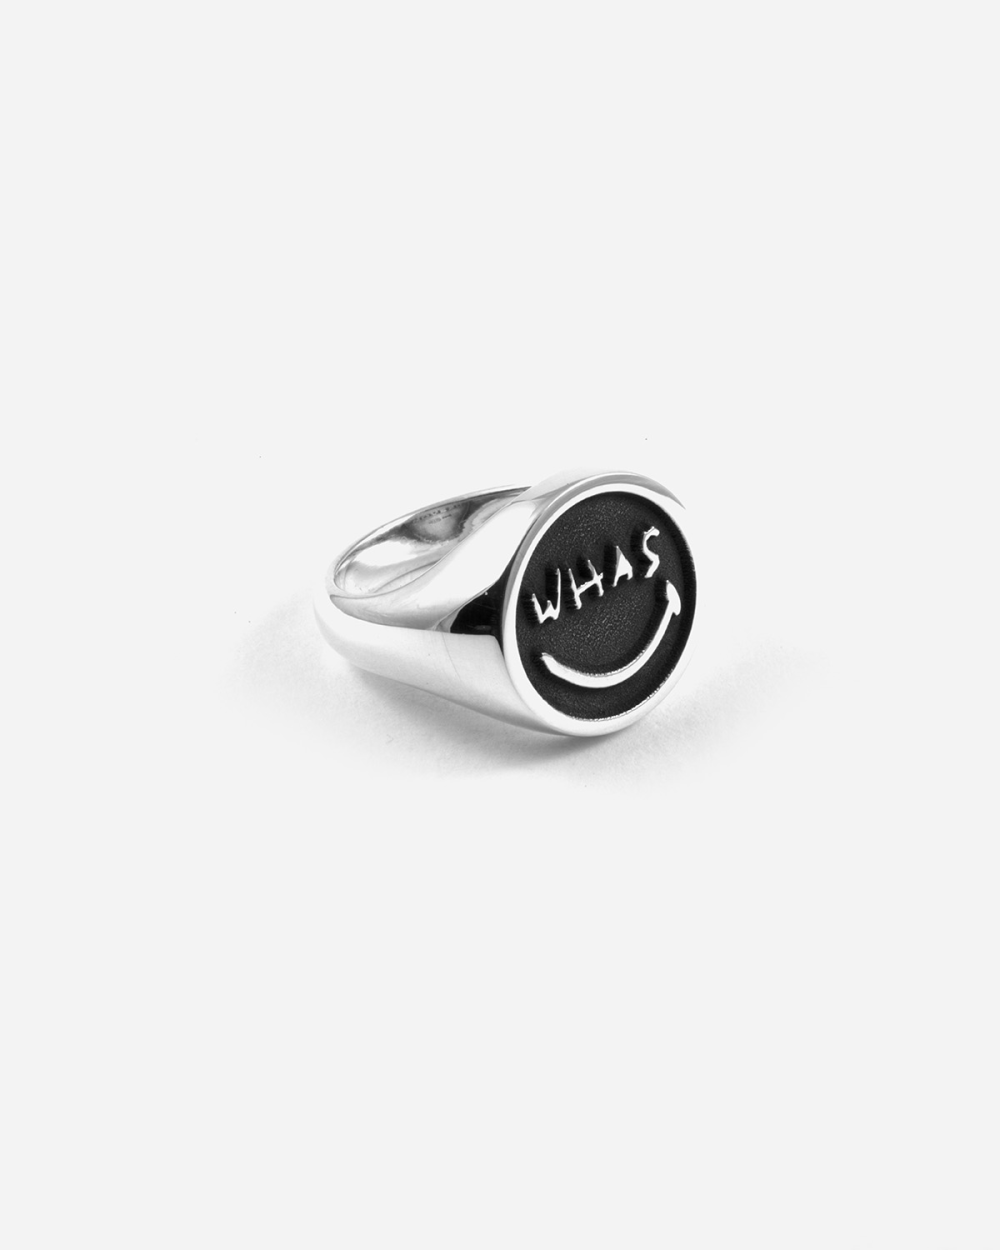 WHAS ROUND SIGNET RING WITH NEGATIVE...